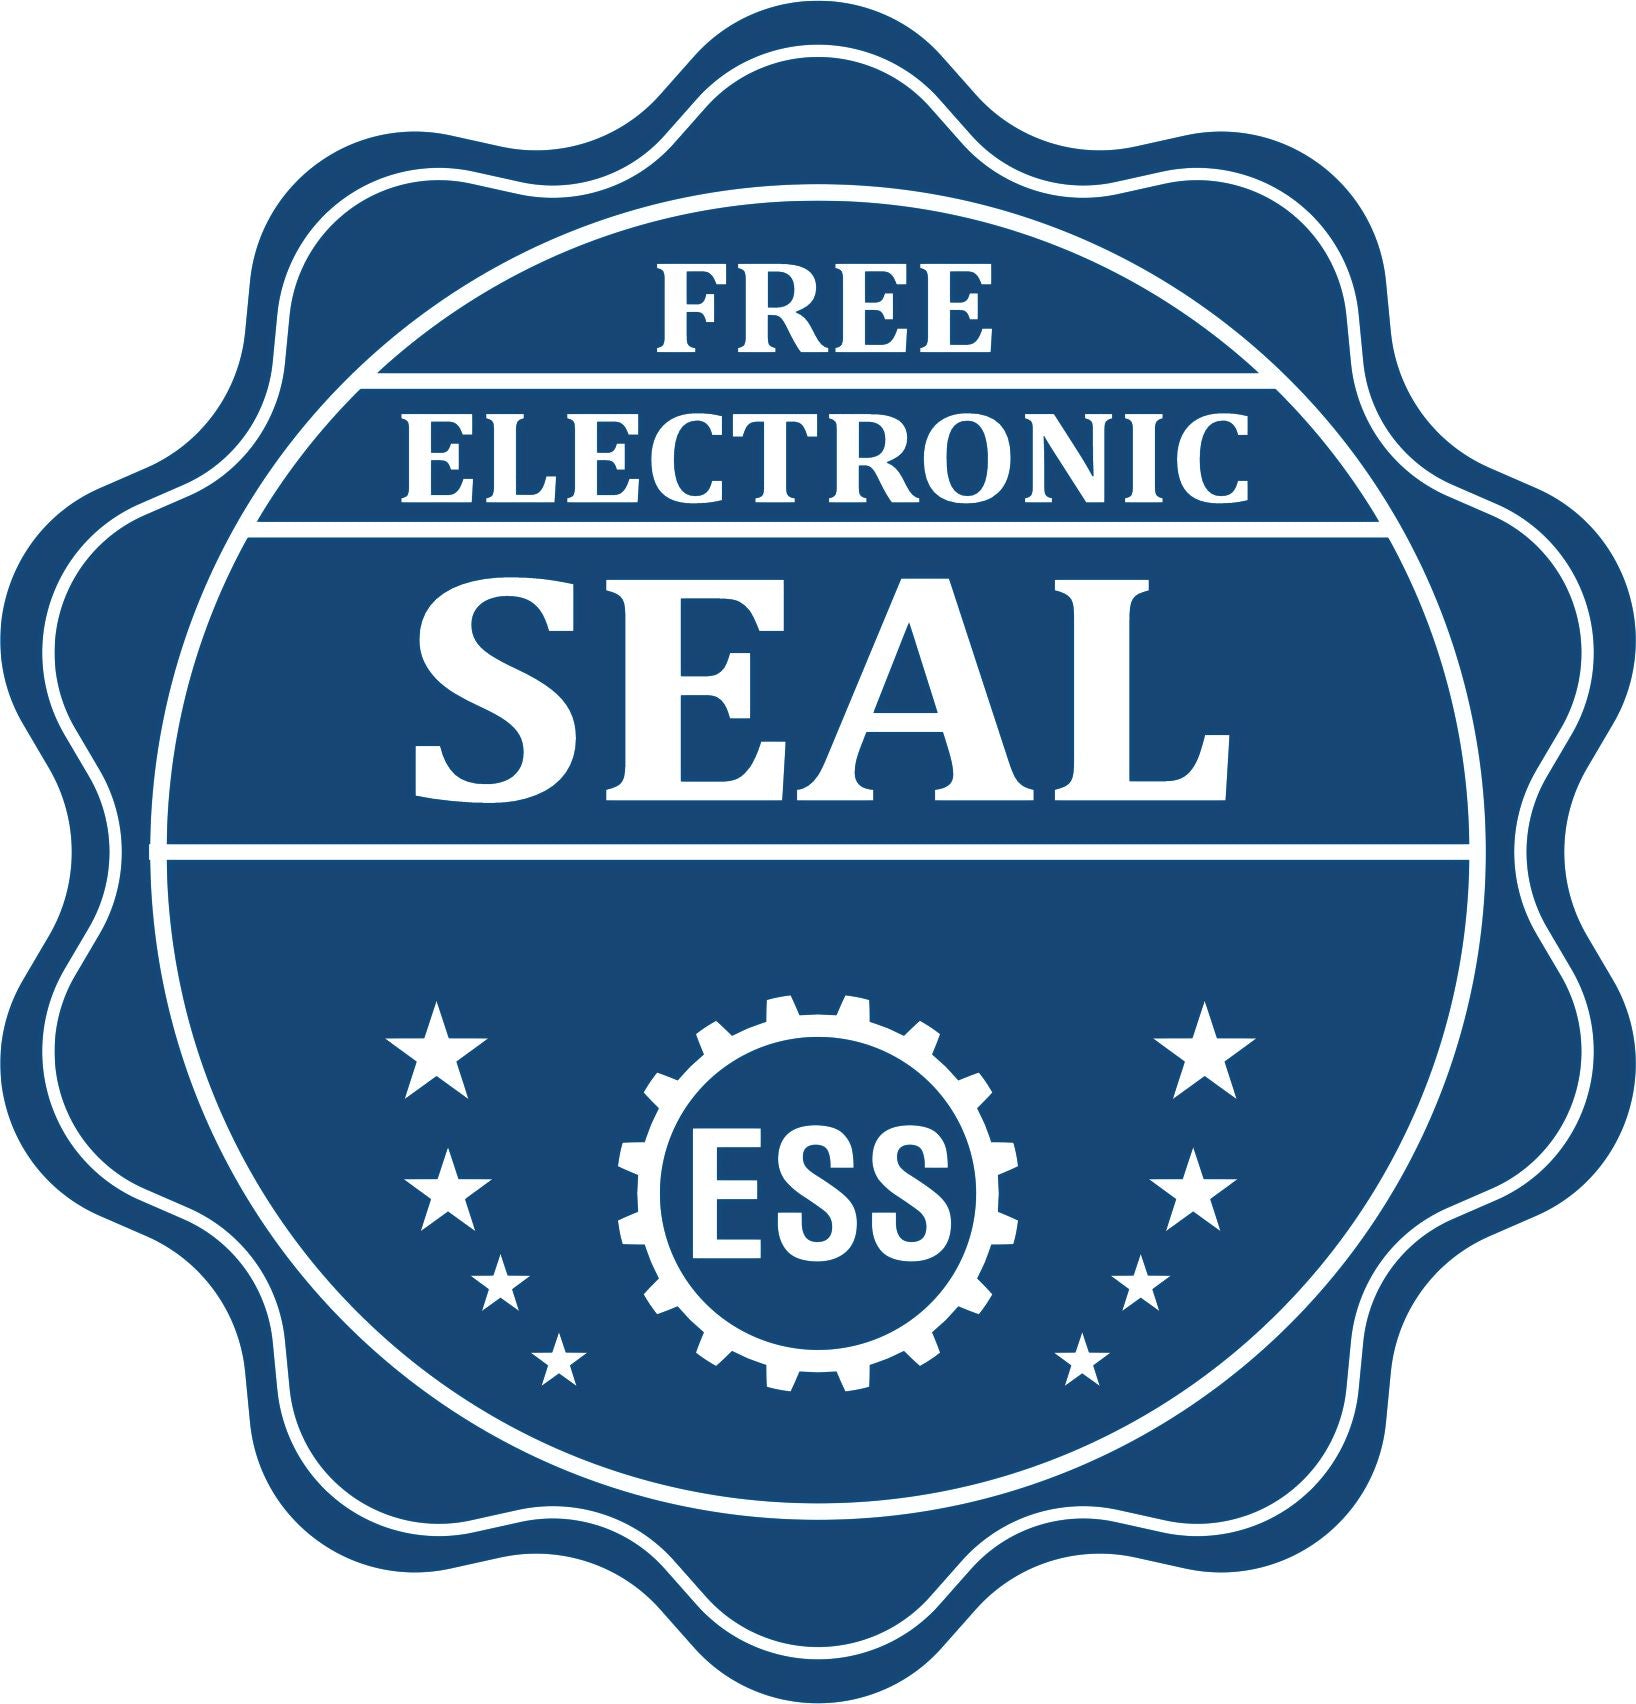 A badge showing a free electronic seal for the Gift Delaware Engineer Seal with stars and the ESS gear on the emblem.